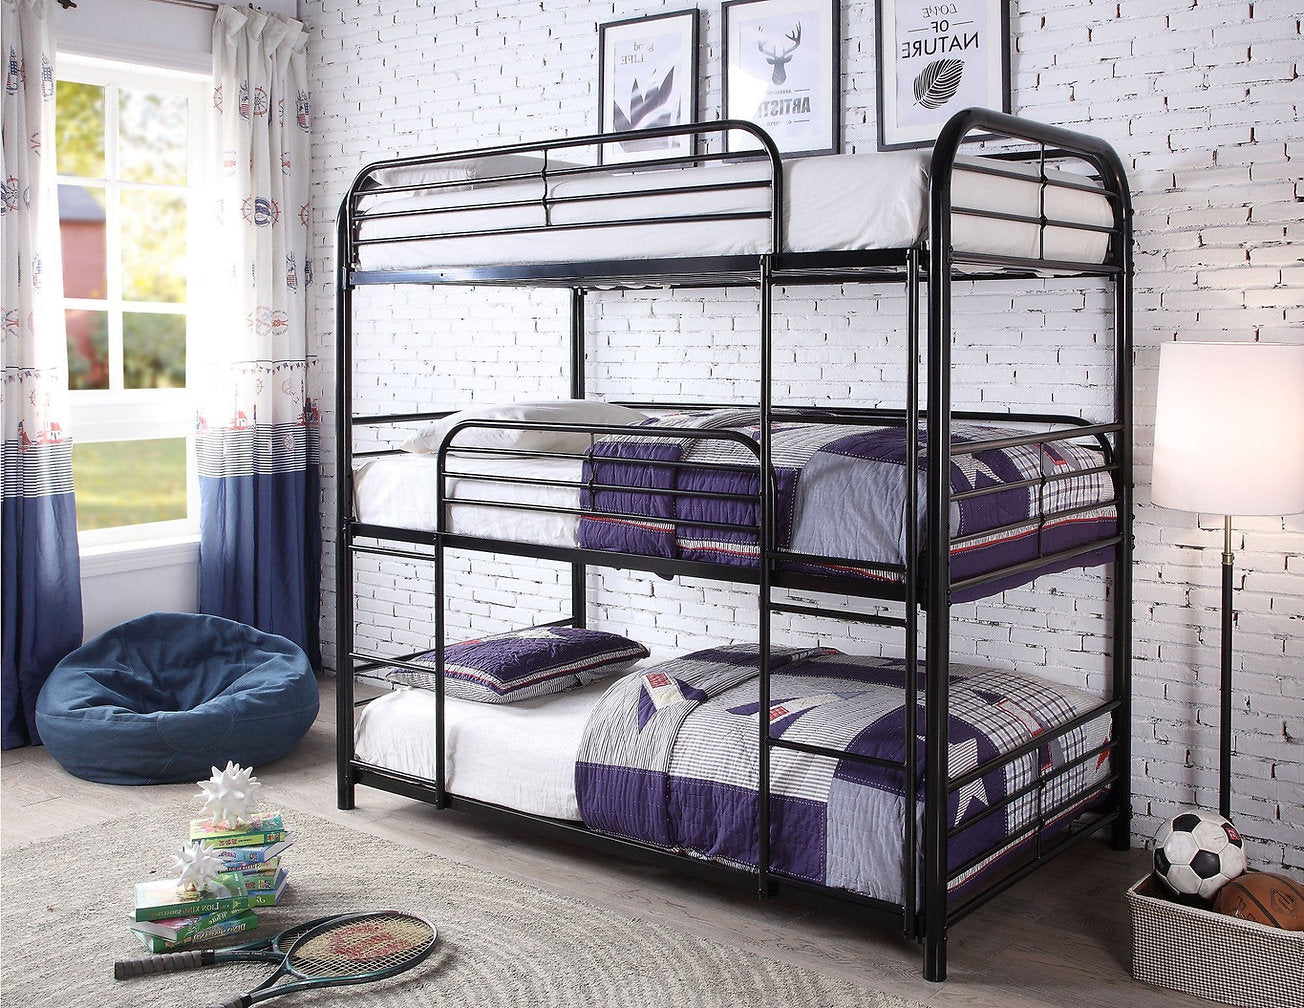 B-503 (Single/Single/Single) - Triple / Triple  Metal Bunk Bed in Black by International Furniture